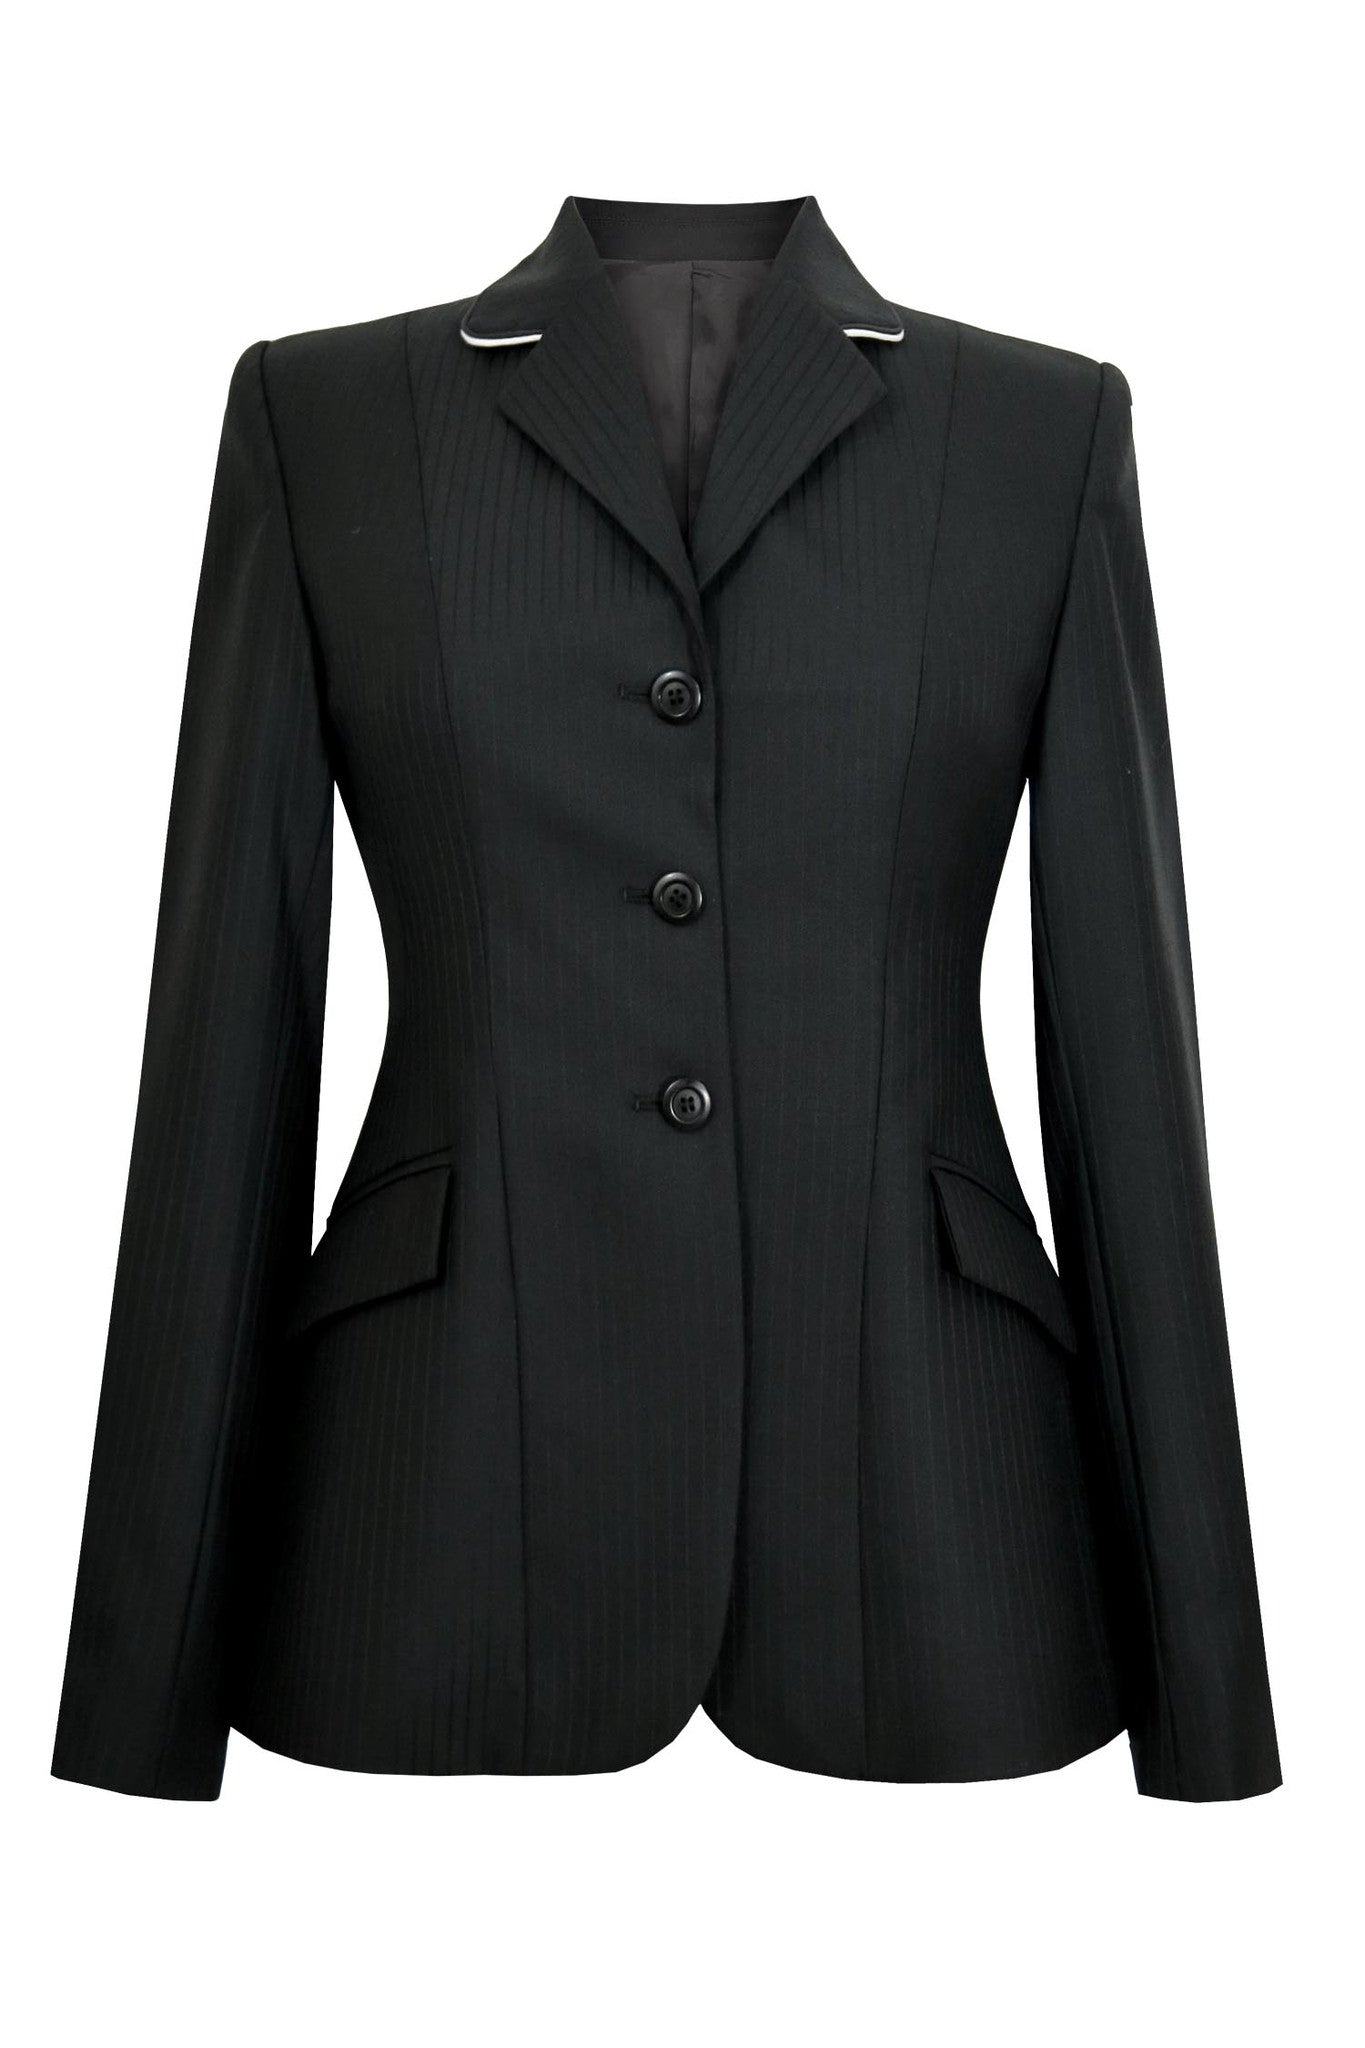 Black wool jacket with thin tonal stripes. White piping on collar.